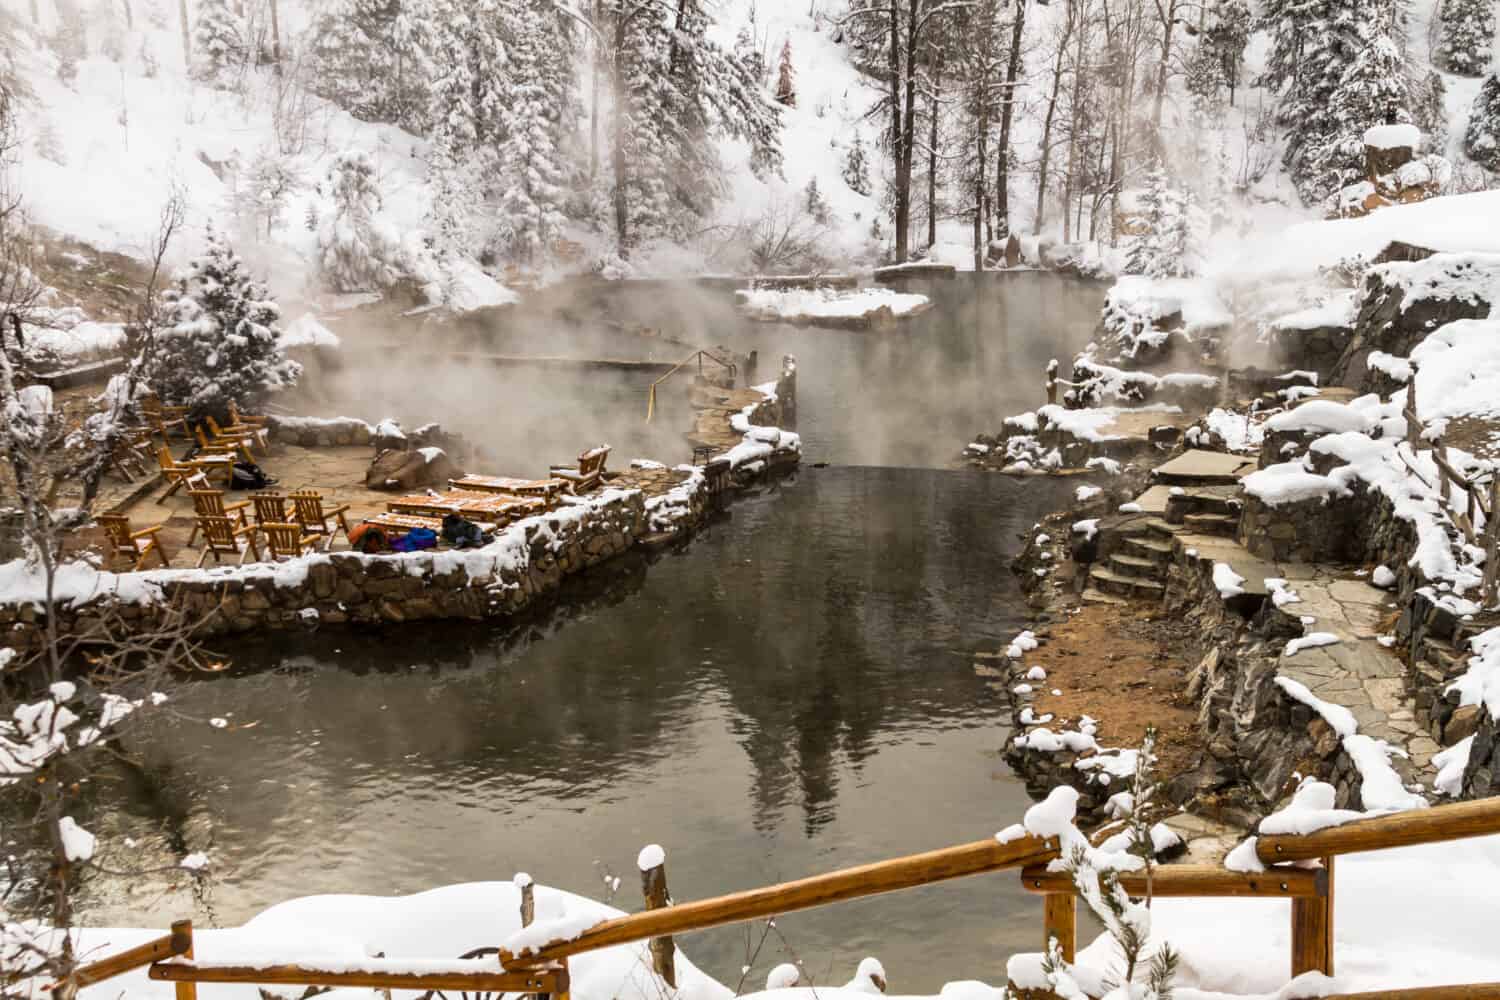 Strawberry Park Hot Springs natural hot springs in winter after freshly fallen snow